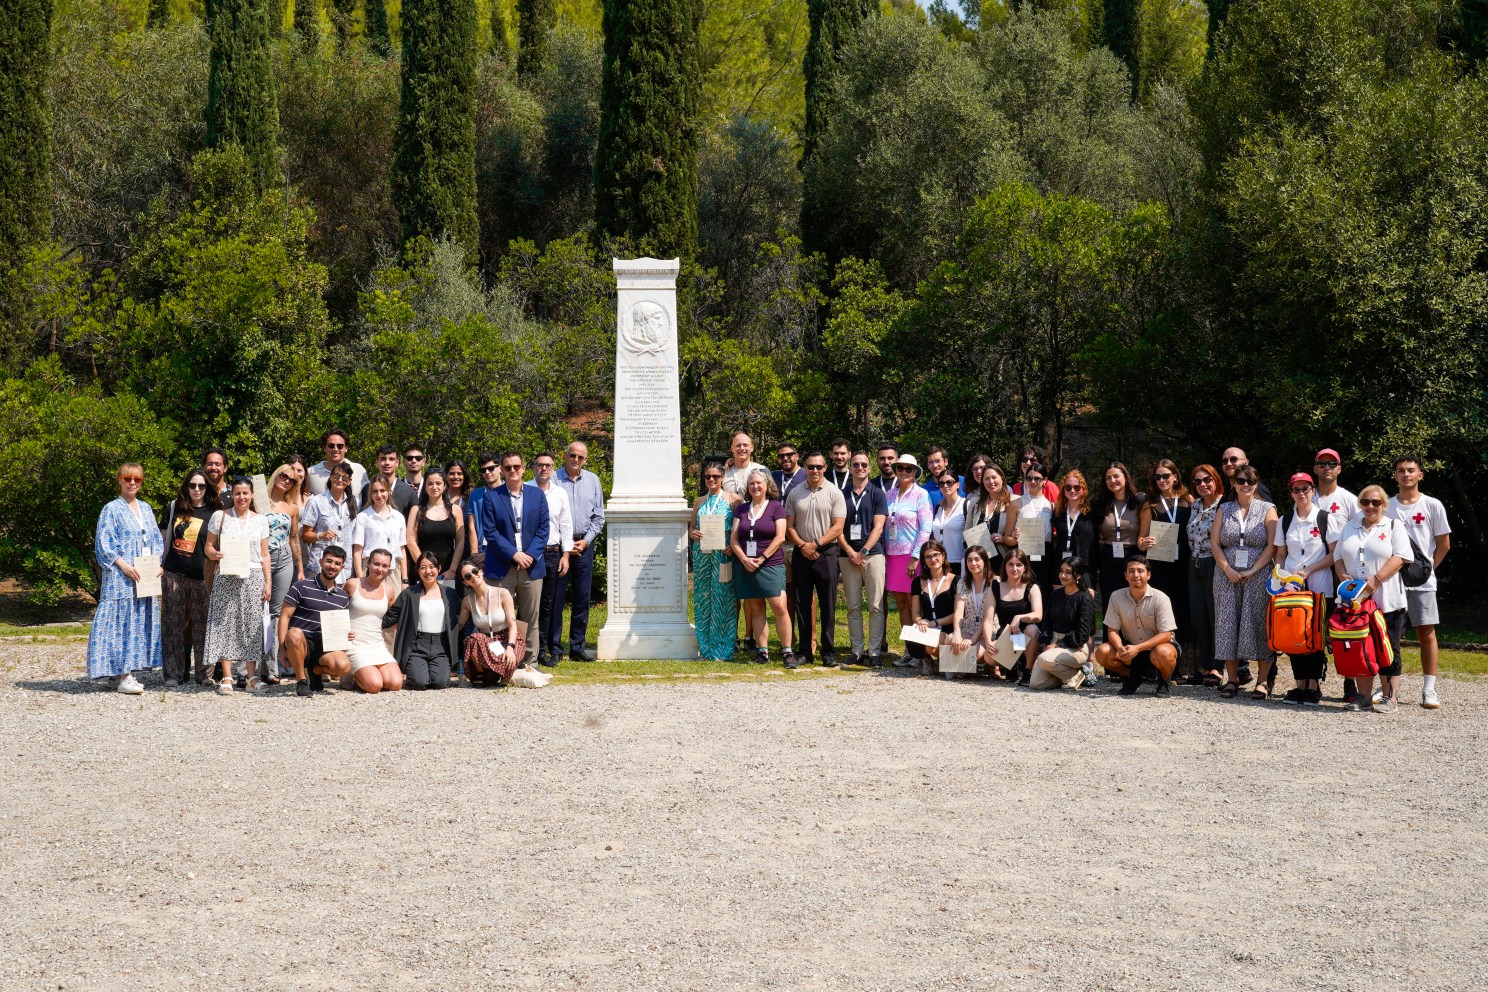 Participants at location where the first runner lit the torch to mark the beginning of the relay to Athens.